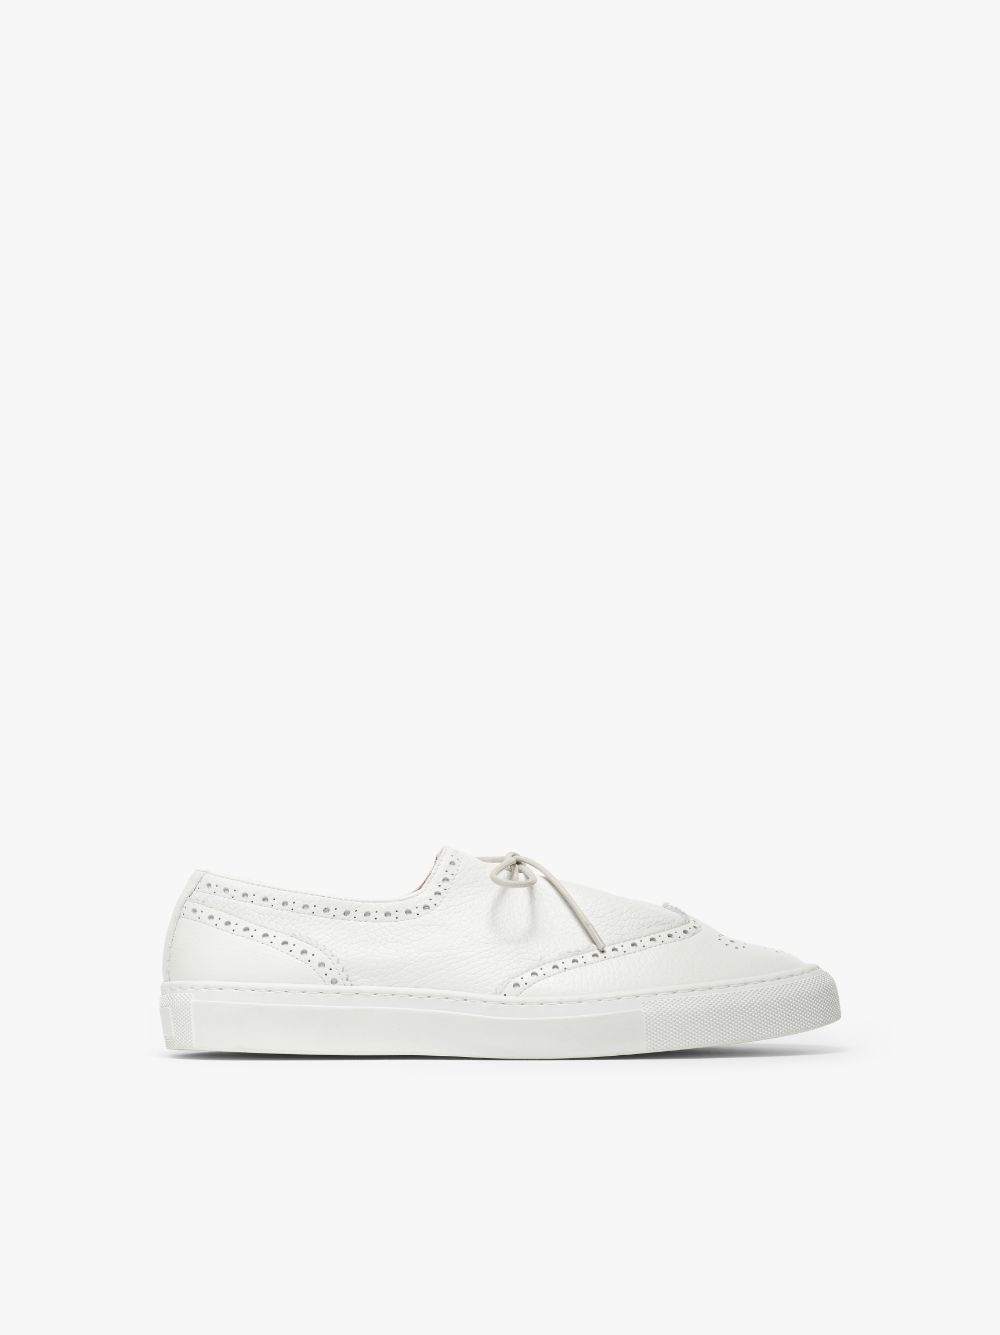 JACQUES SOLOVIÈRE WHITE LEATHER GOLF SNEAKERS - 1